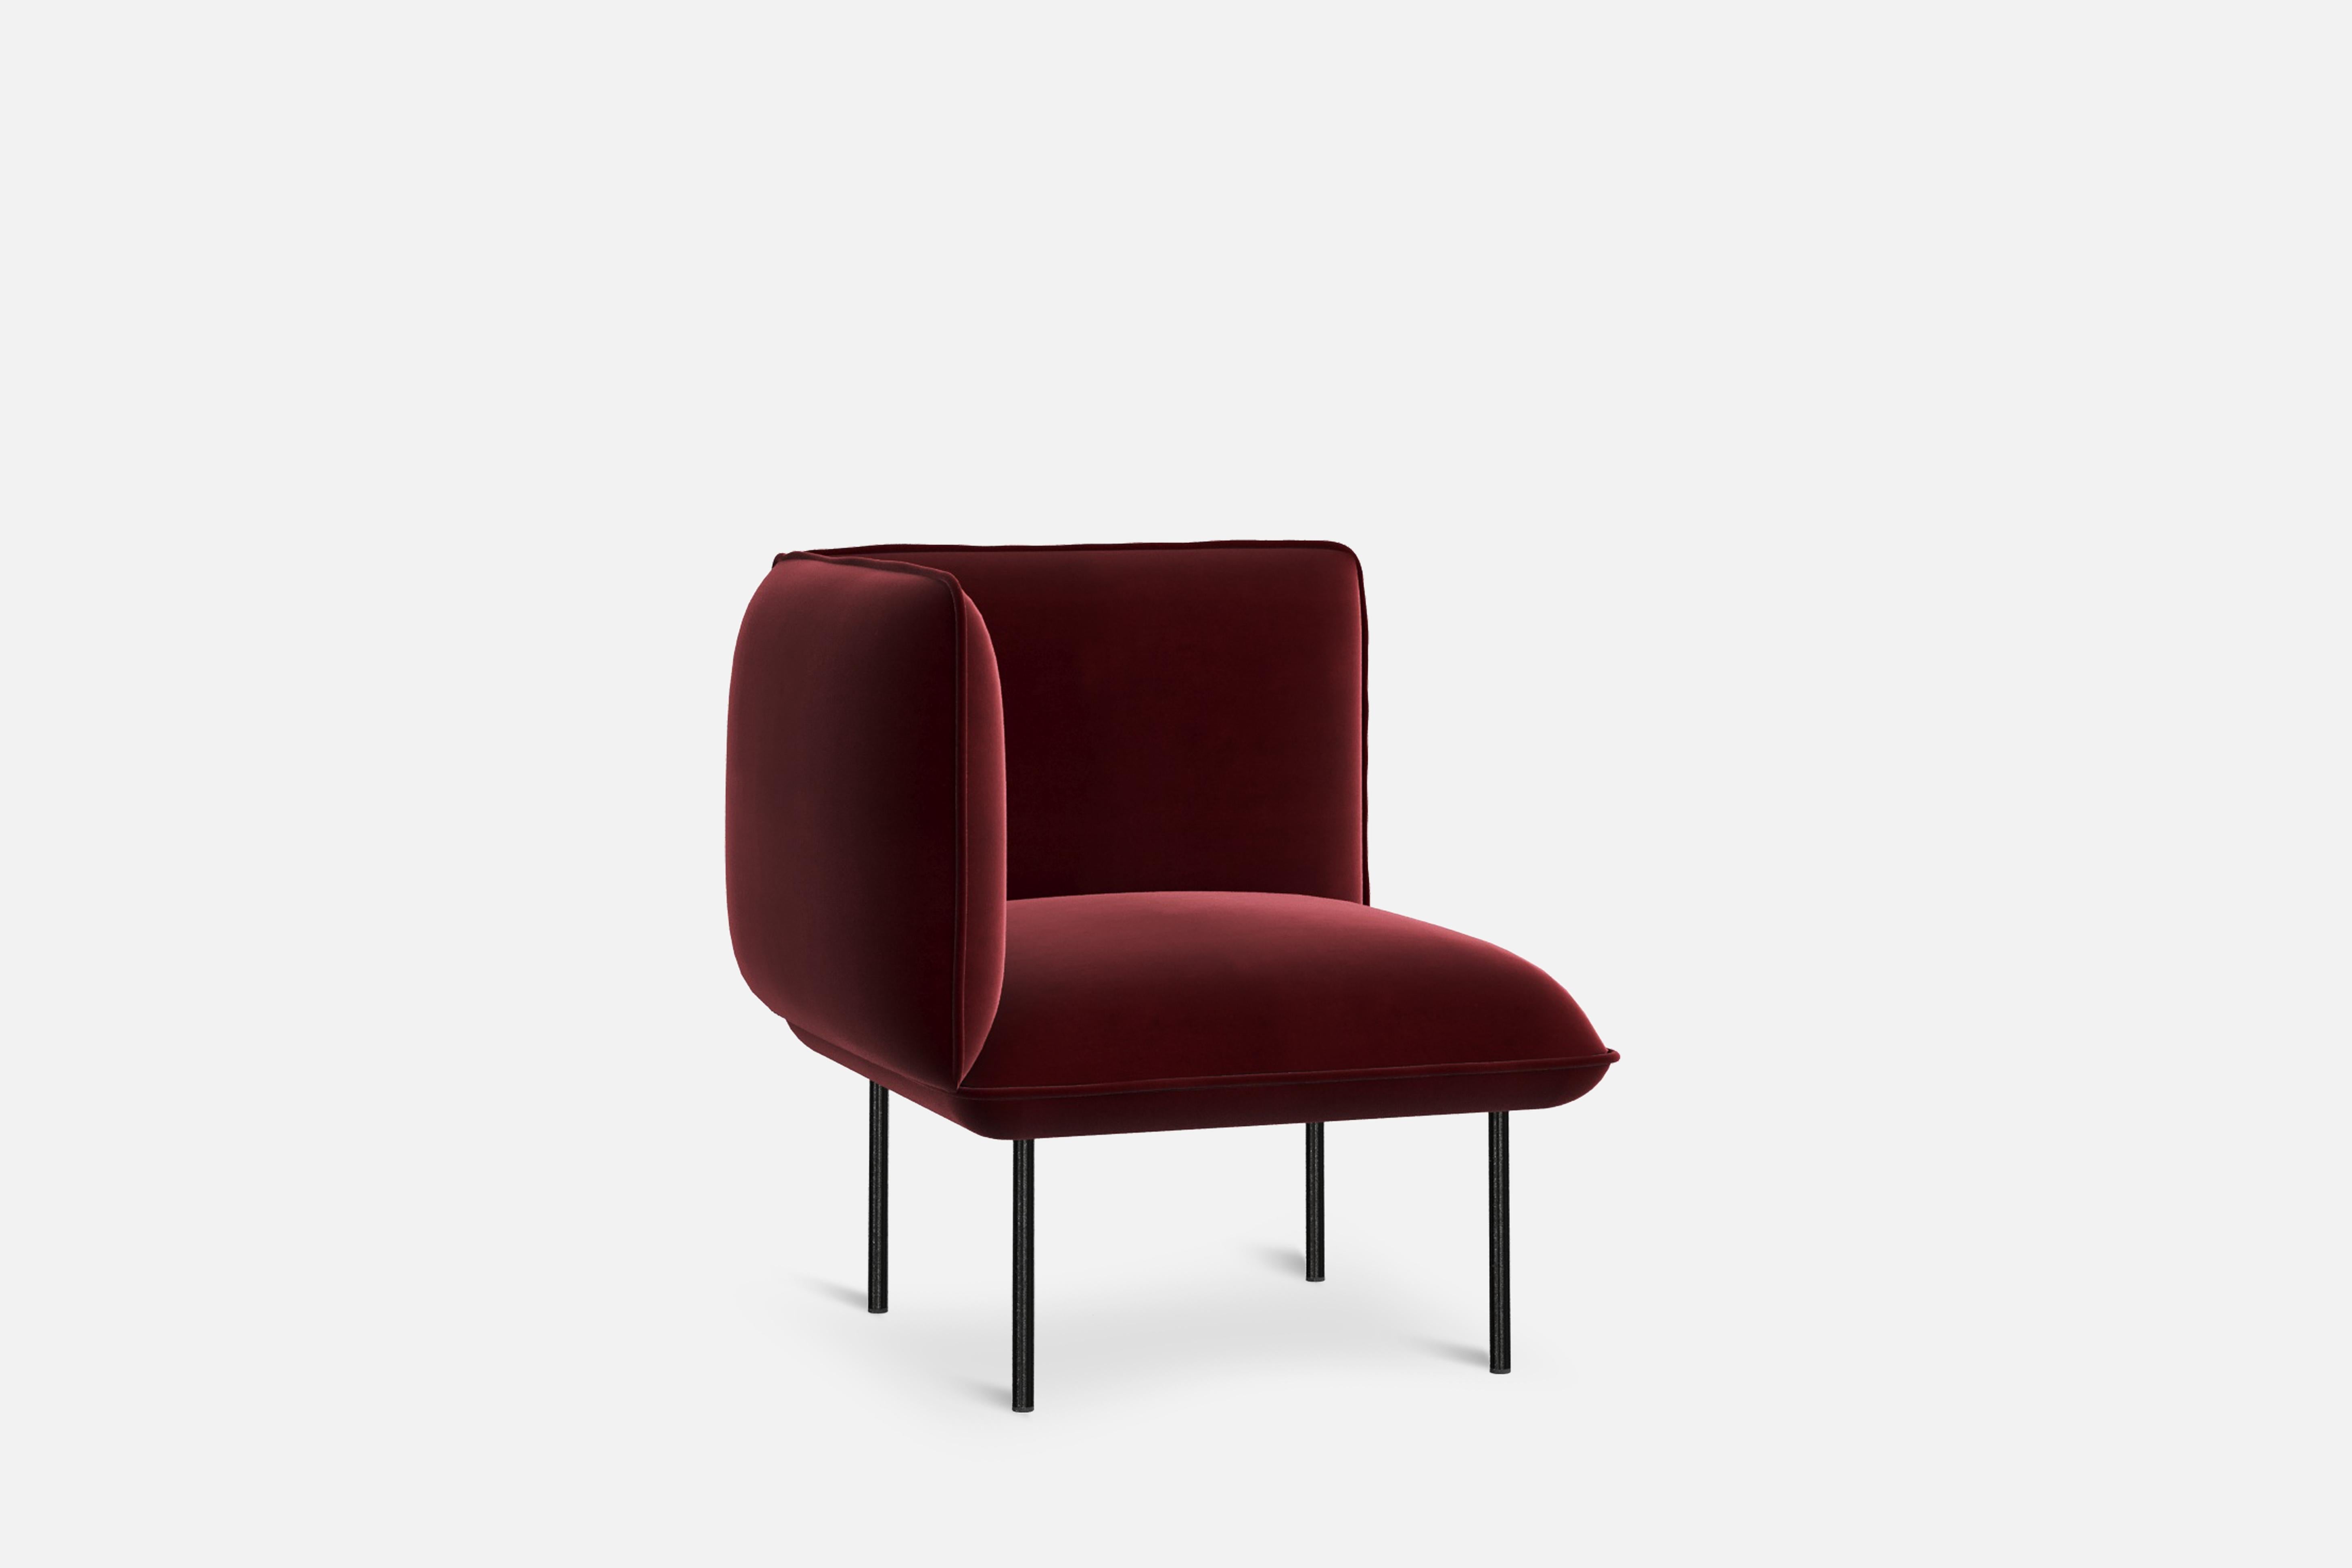 Nakki lobby corner module by Mika Tolvanen.
Materials: foam, plywood, elastic belts, memory foam, fabric (Harald 3).
Dimensions: D 78 x W 78 x H 82 cm.
Also available in different colours and materials.

The founders, Mia and Torben Koed,